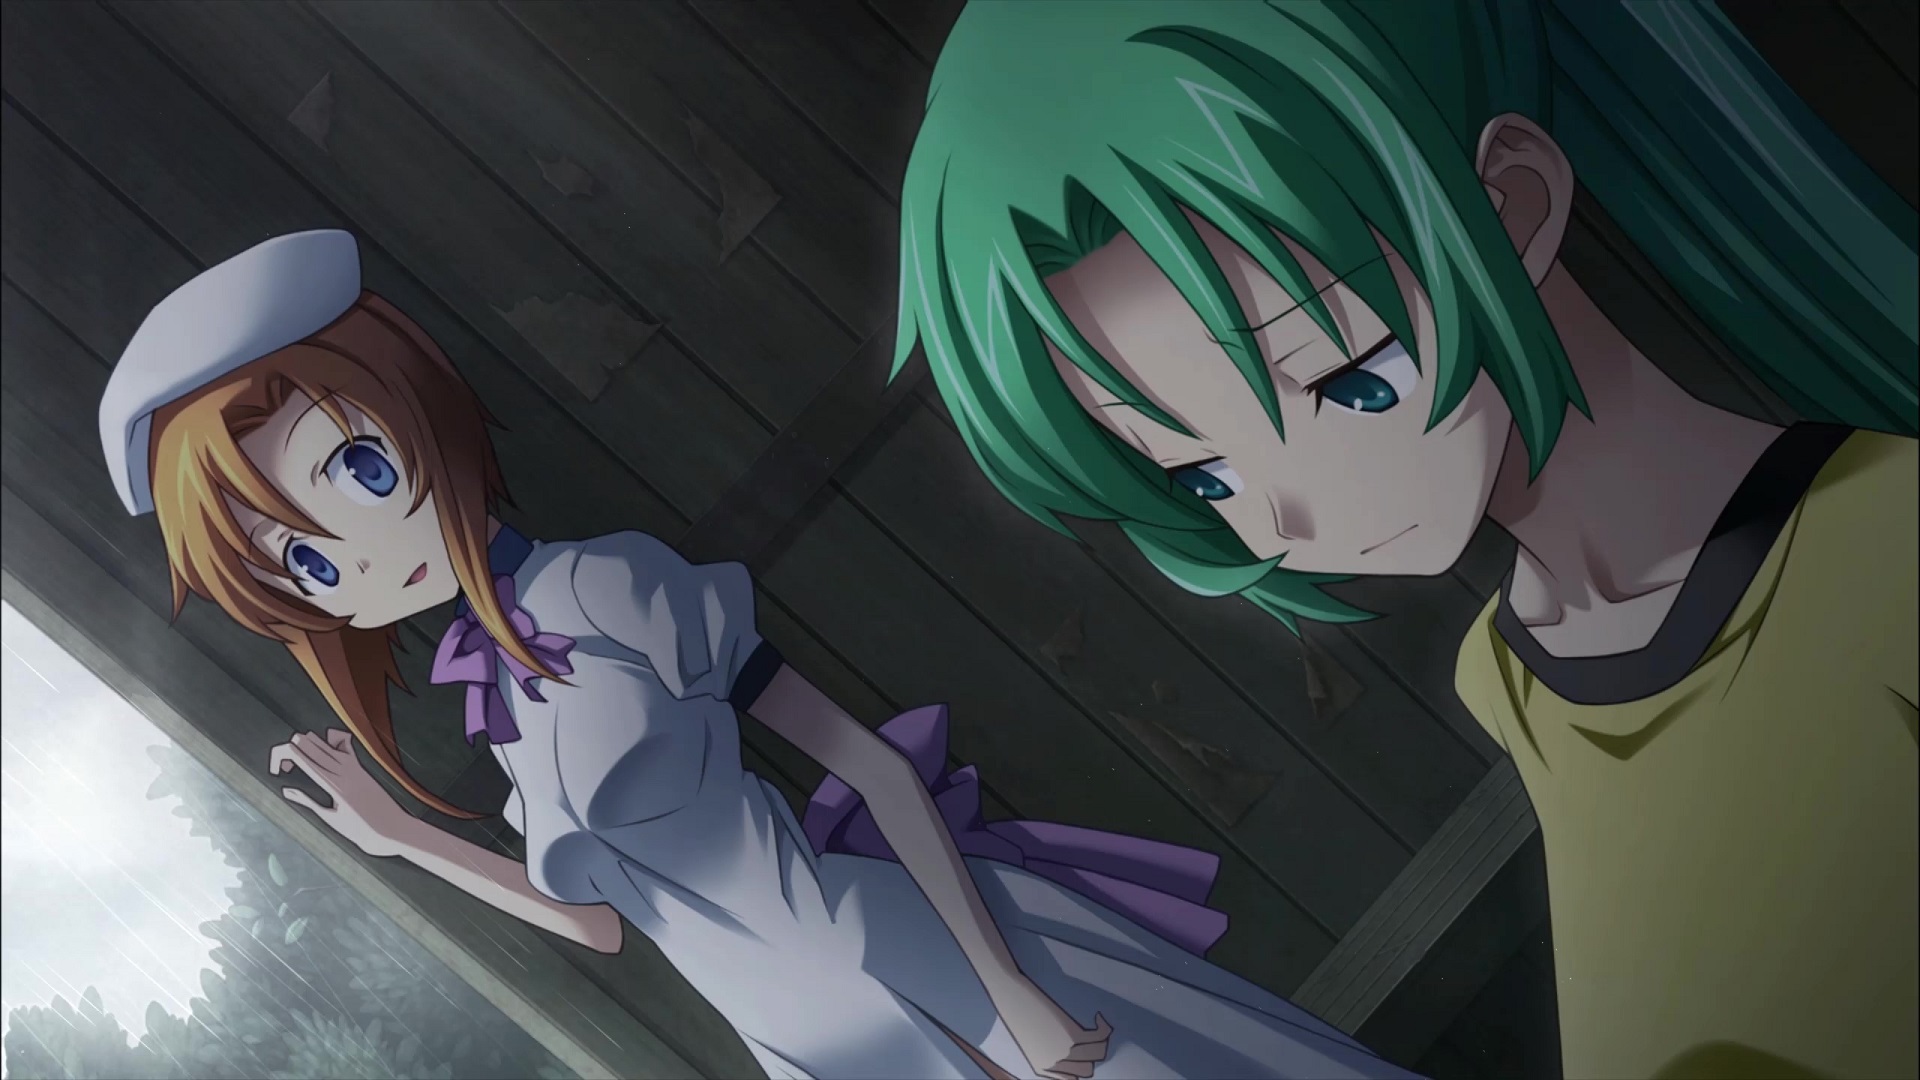 Download Higurashi When They Cry wallpapers for mobile phone free  Higurashi When They Cry HD pictures